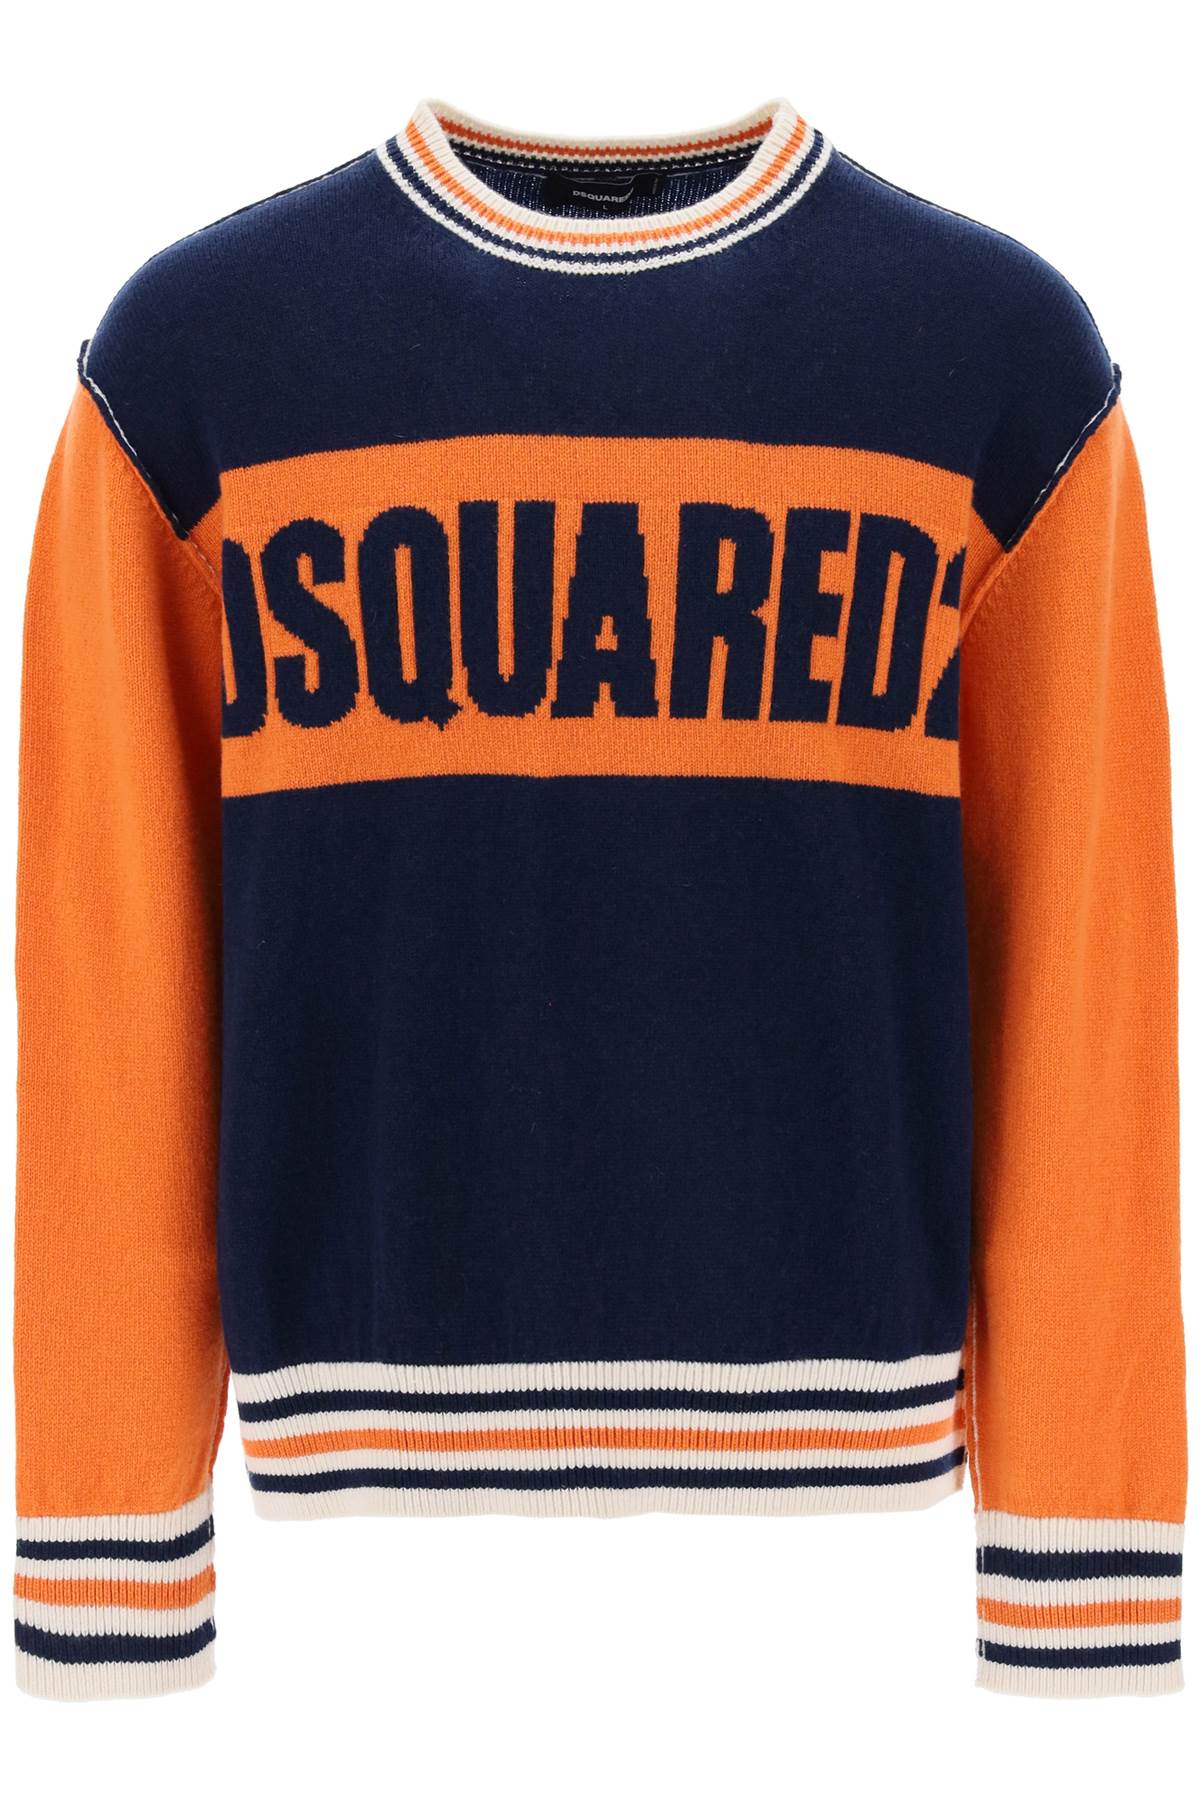 Dsquared2 college sweater in jacquard wool-0